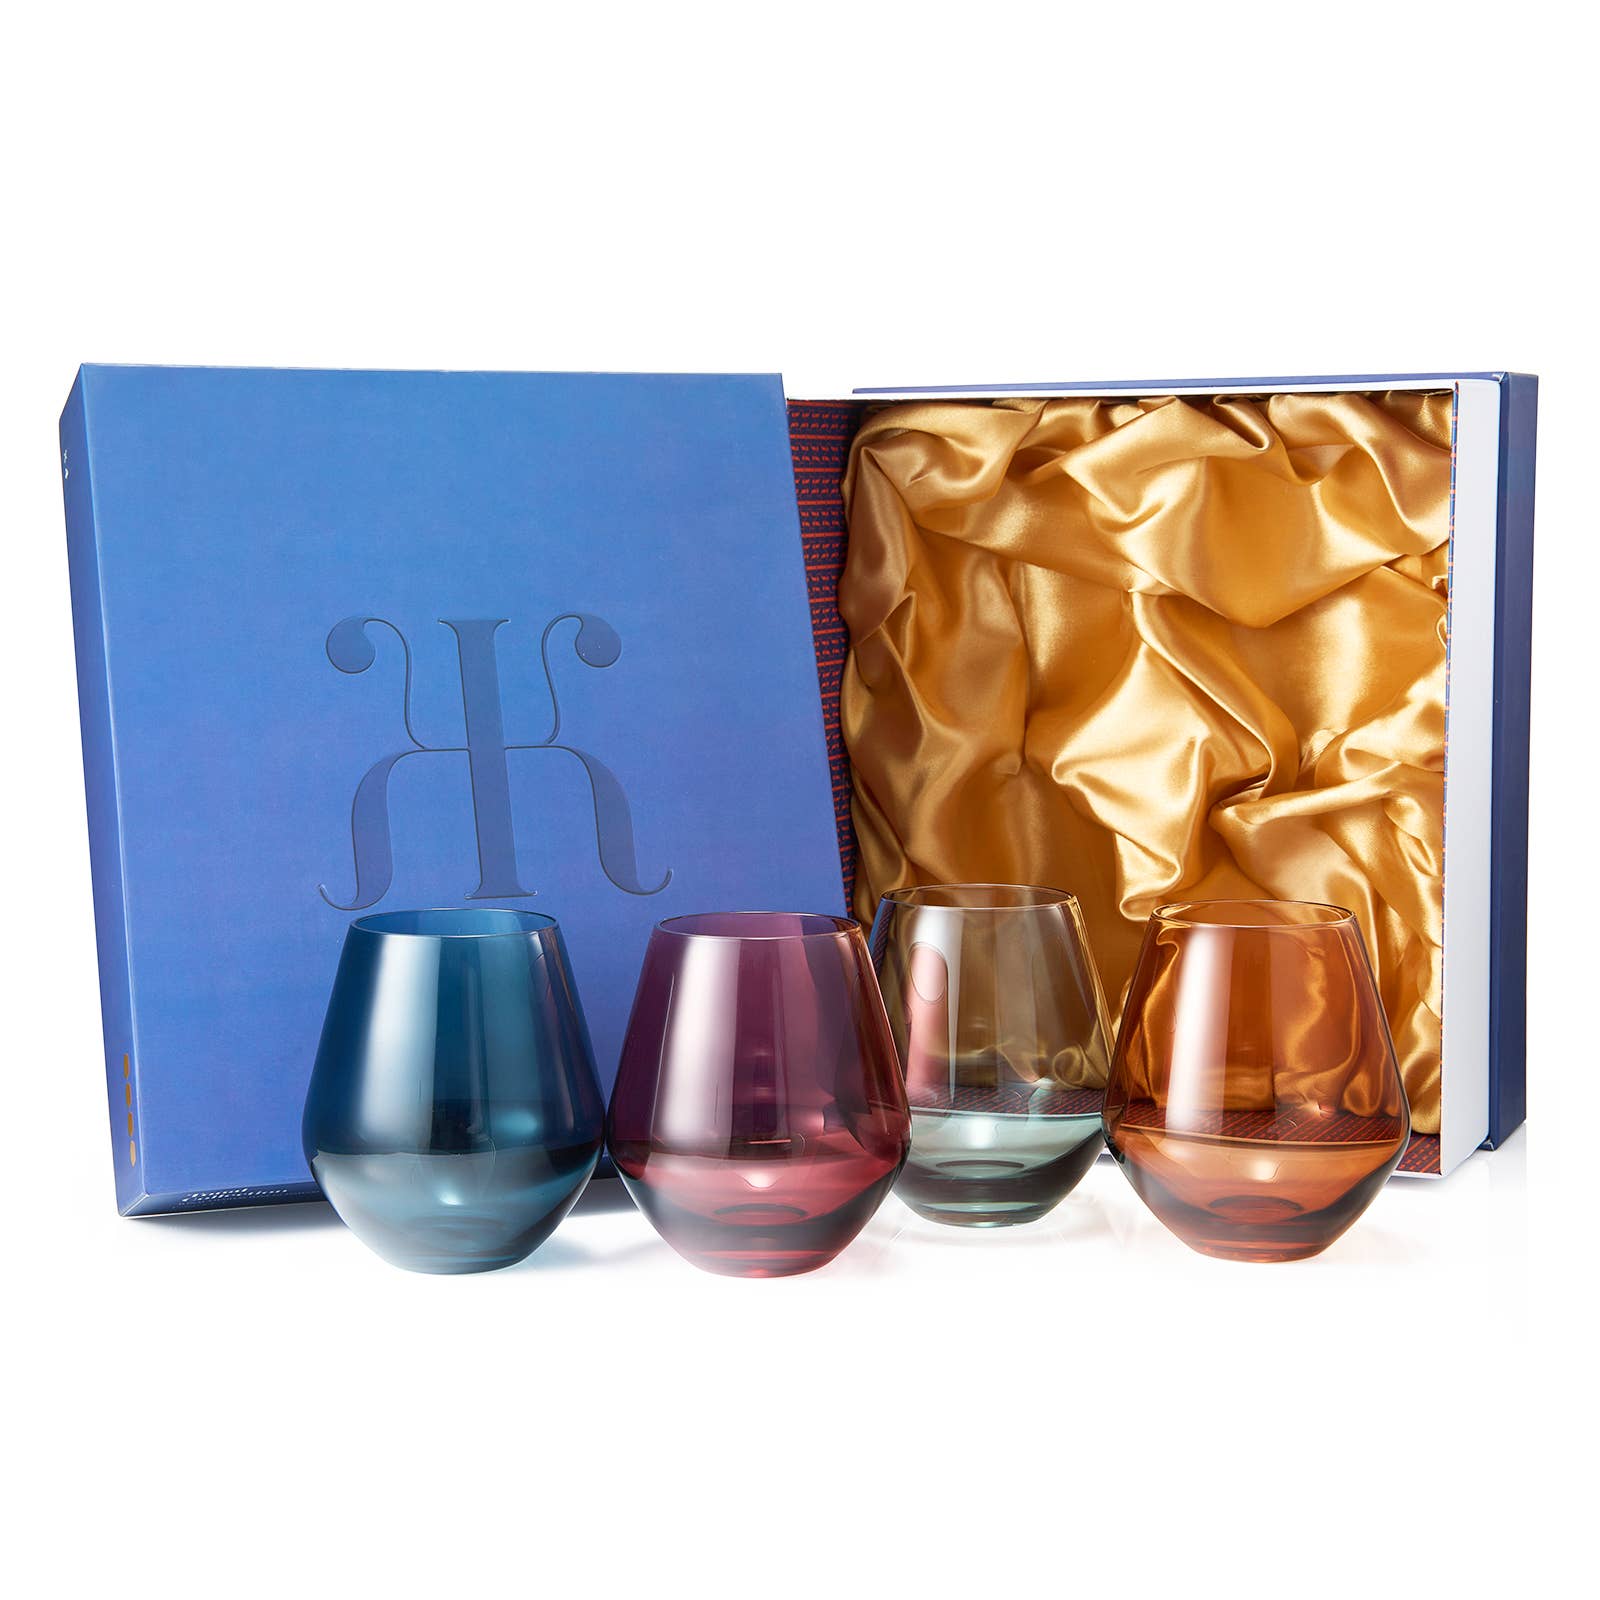 Unbreakable Colored Stemless Wine Glasses